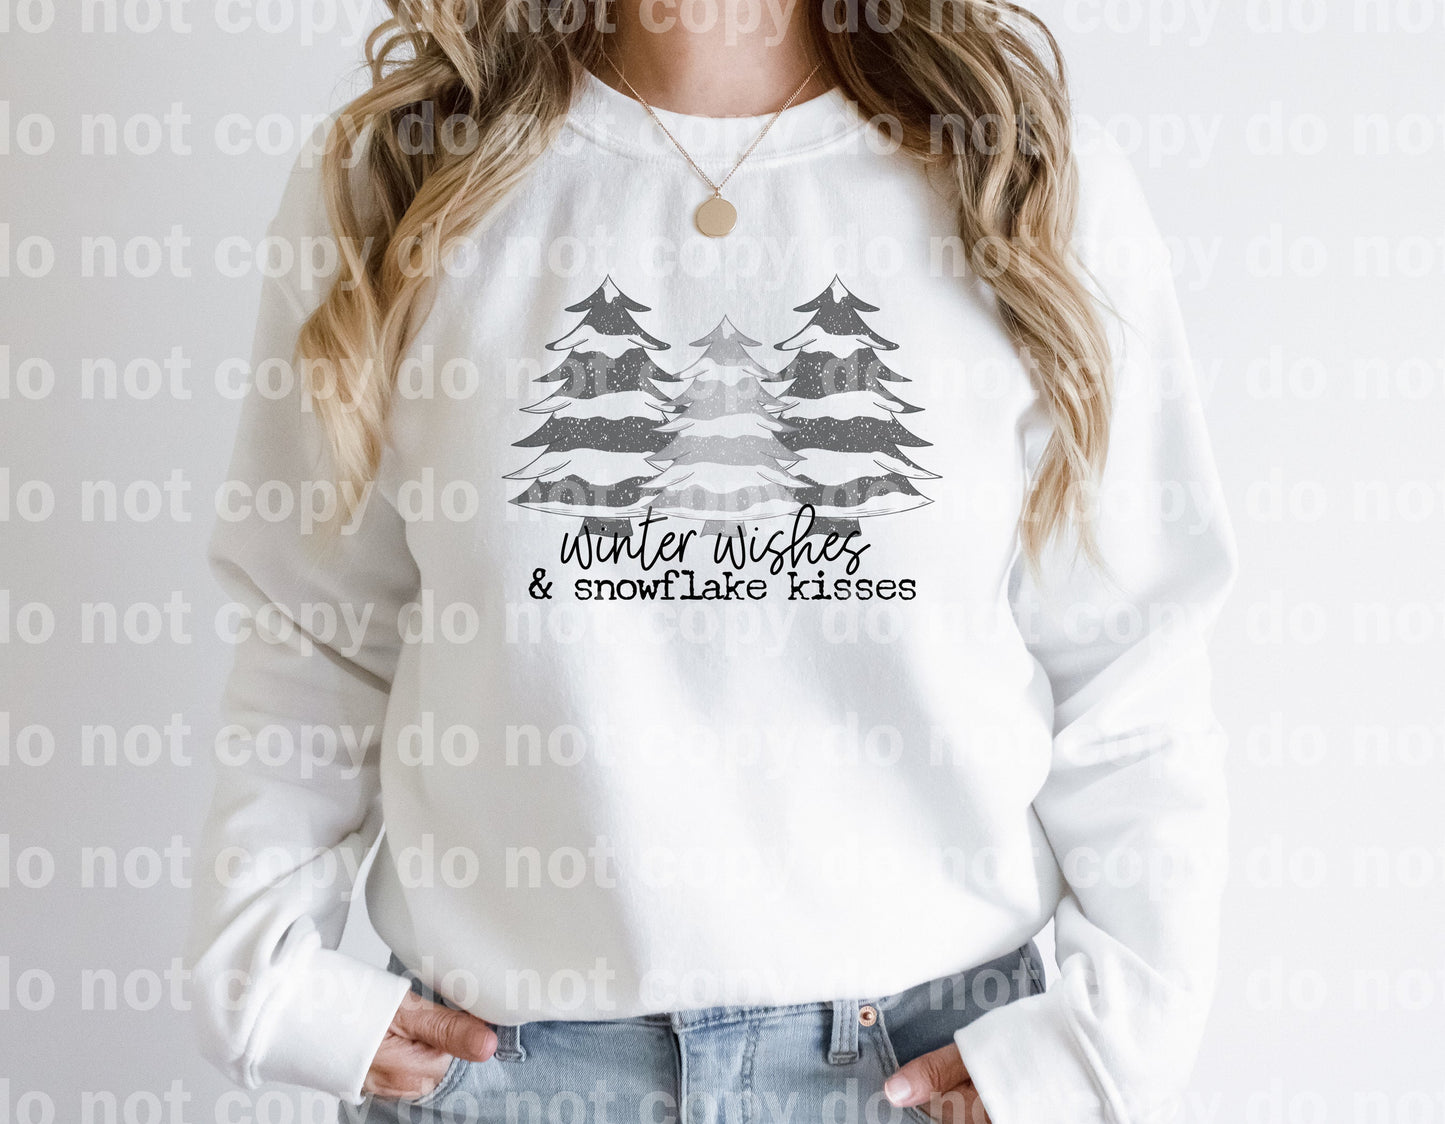 Winter Wishes Snowflake Kisses Dream Print or Sublimation Print